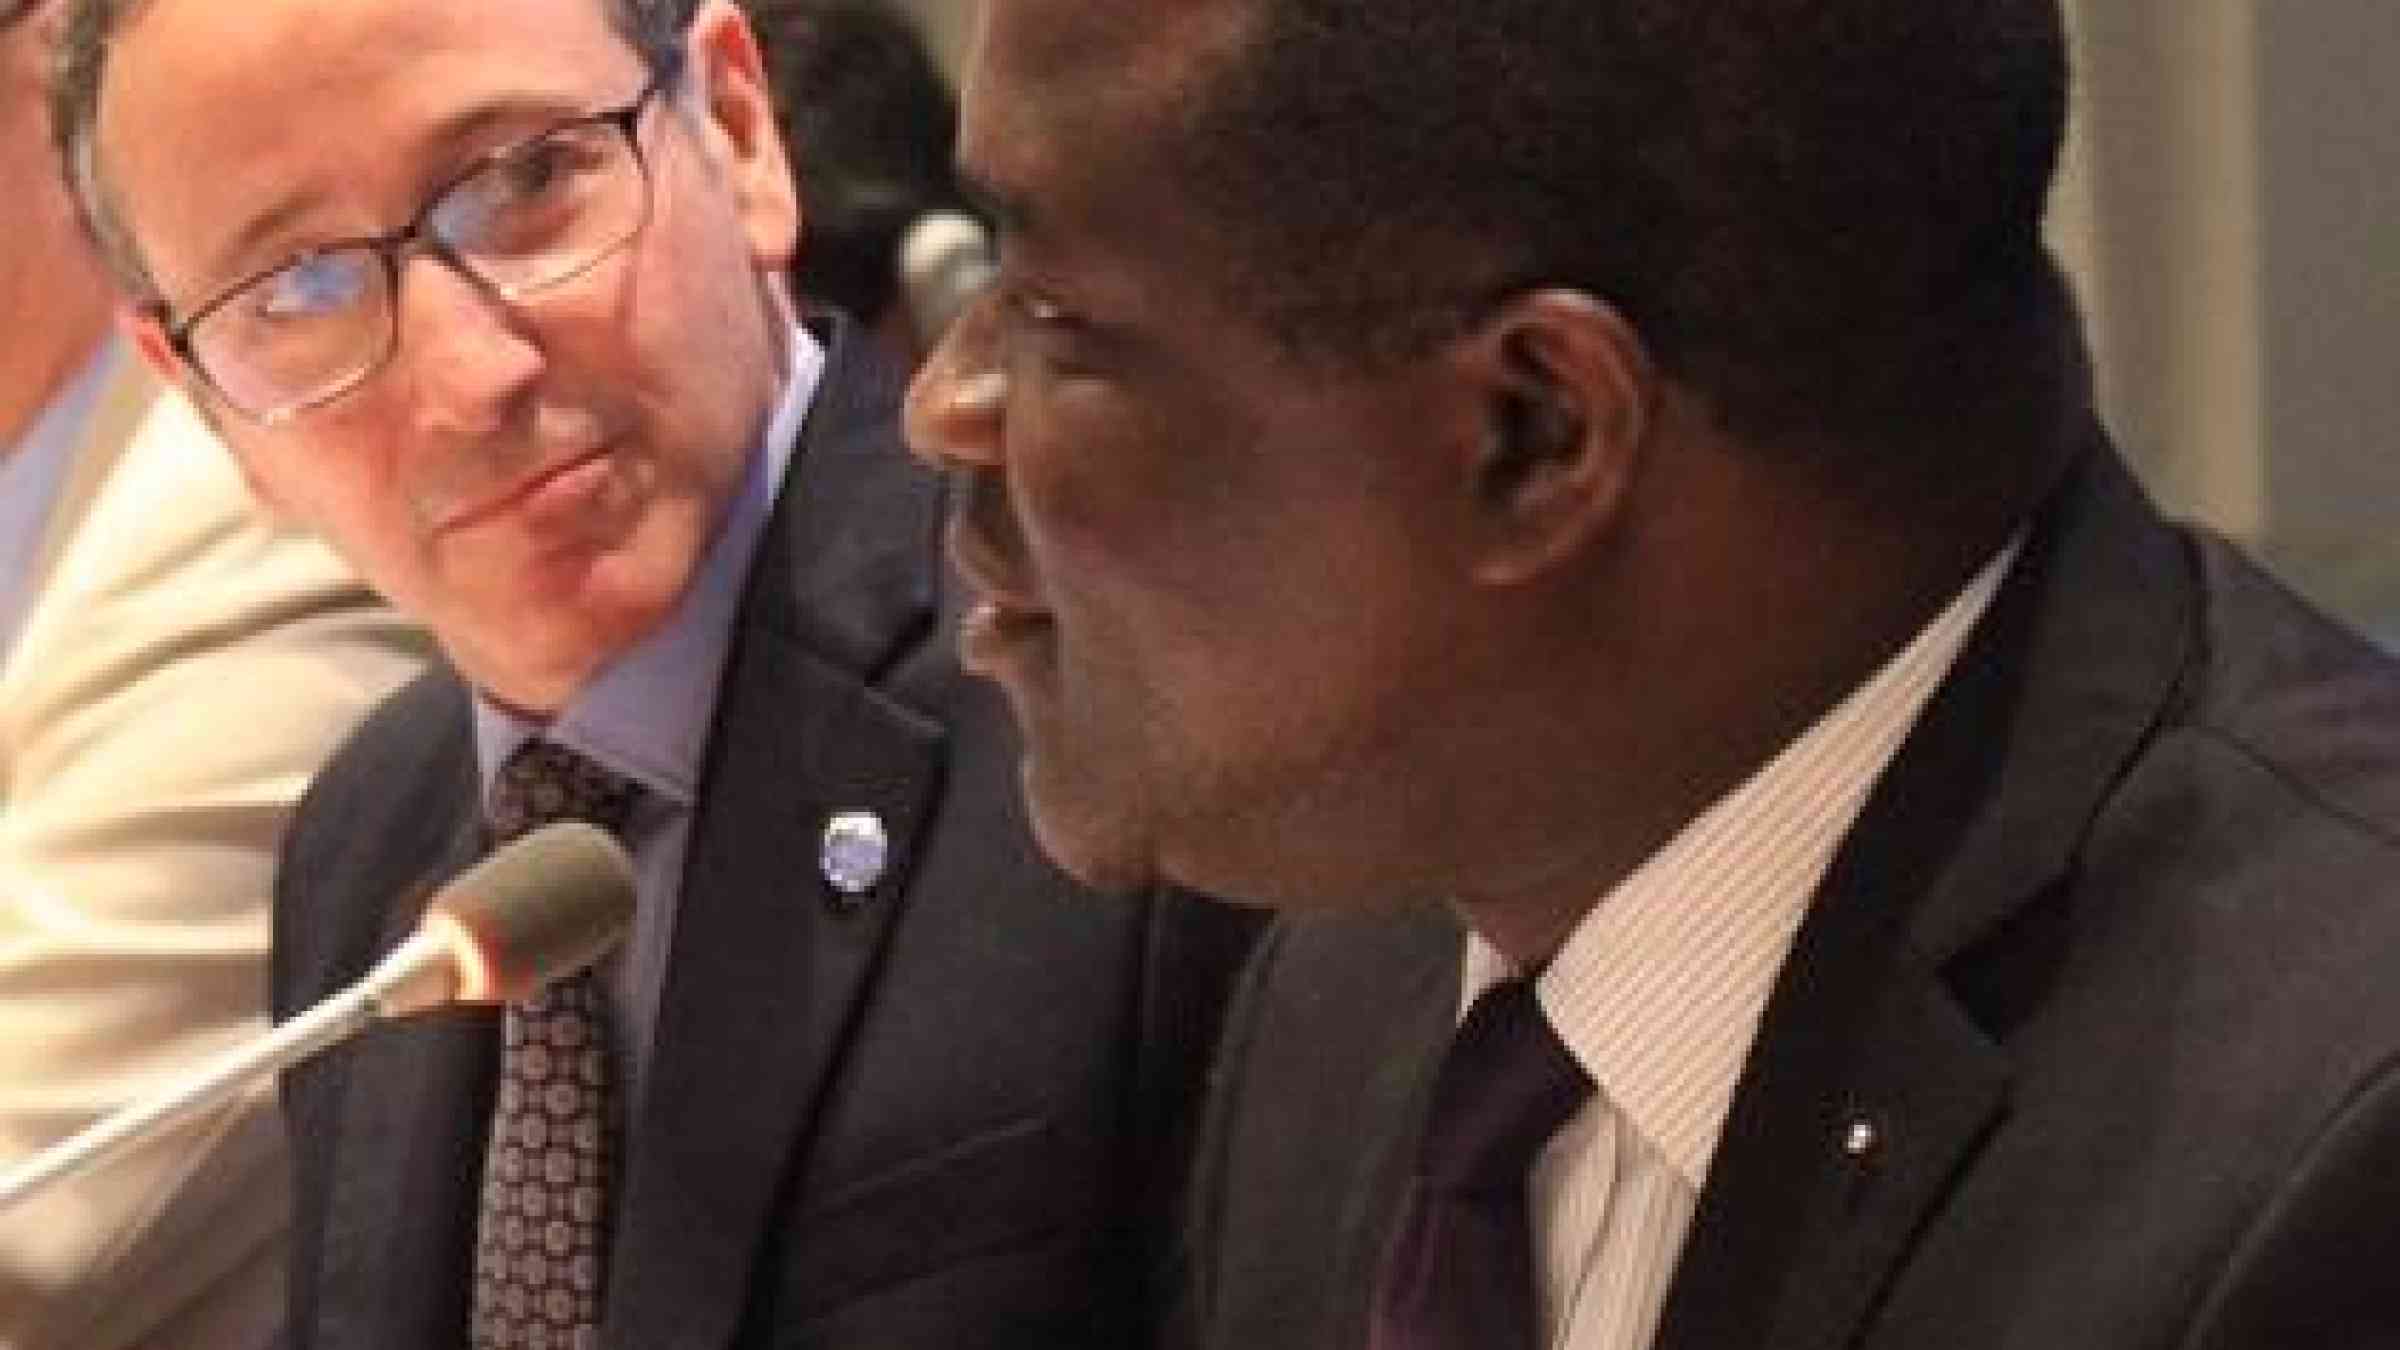 Mr. Robert Glasser, Special Representative of the Secretary-General for Disaster Risk Reduction (left), listens as Mr. Vandi Chidi Minah, Permanent Representative of Sierra Leone to the United Nations, addresses the session on sustainable development (Photo: UNISDR)